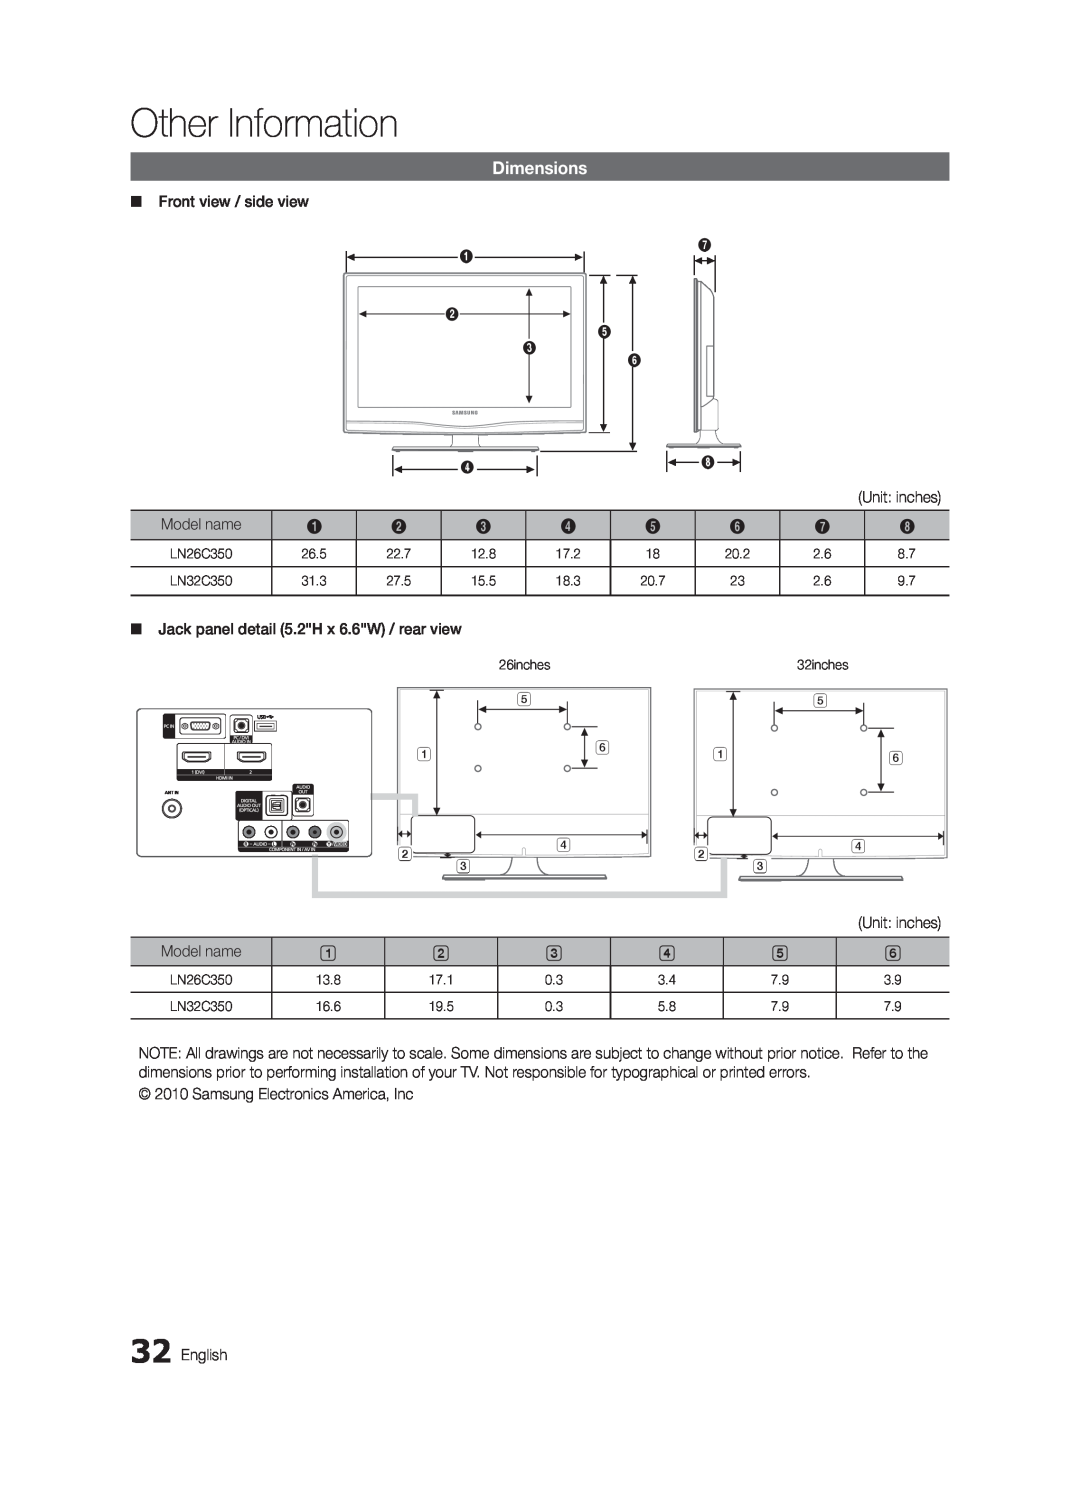 Samsung BN68-02620B-06 user manual Dimensions, Other Information, Jack panel detail 5.2H x 6.6W / rear view 